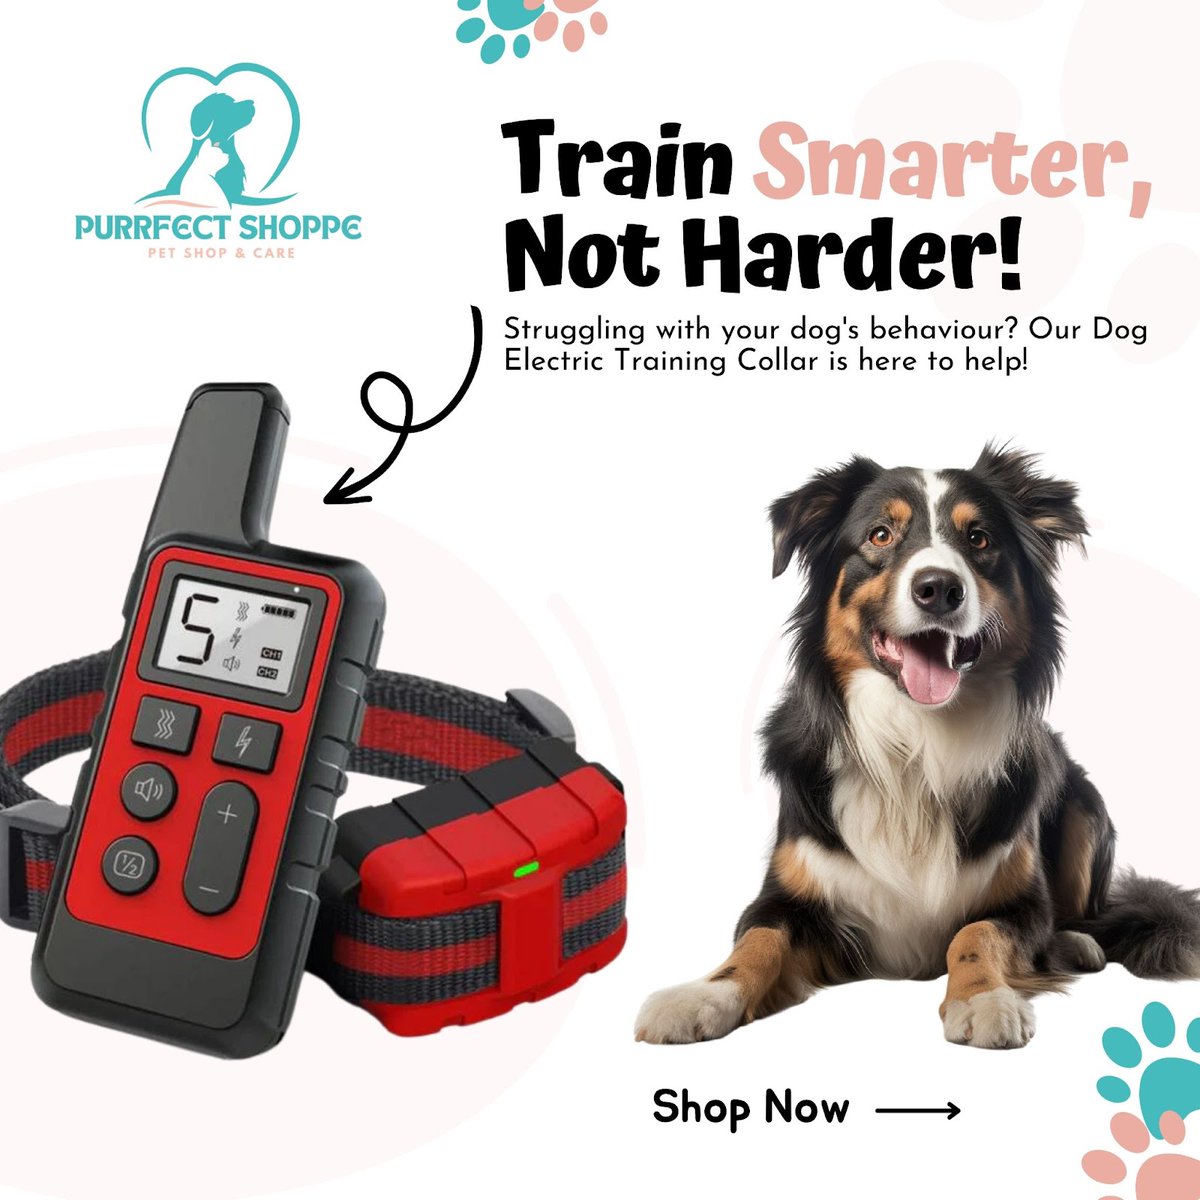 Struggling with your dog's behaviour? Our Dog Electric Training Collar is here to help! Say goodbye to barking and disobedience with its beep, shock, and vibration functions.
---
Get yours now. purrfectshoppe.com/products/1pc-d… 
.
#dogtraining #electriccollar #positivehabits #dogbehavior